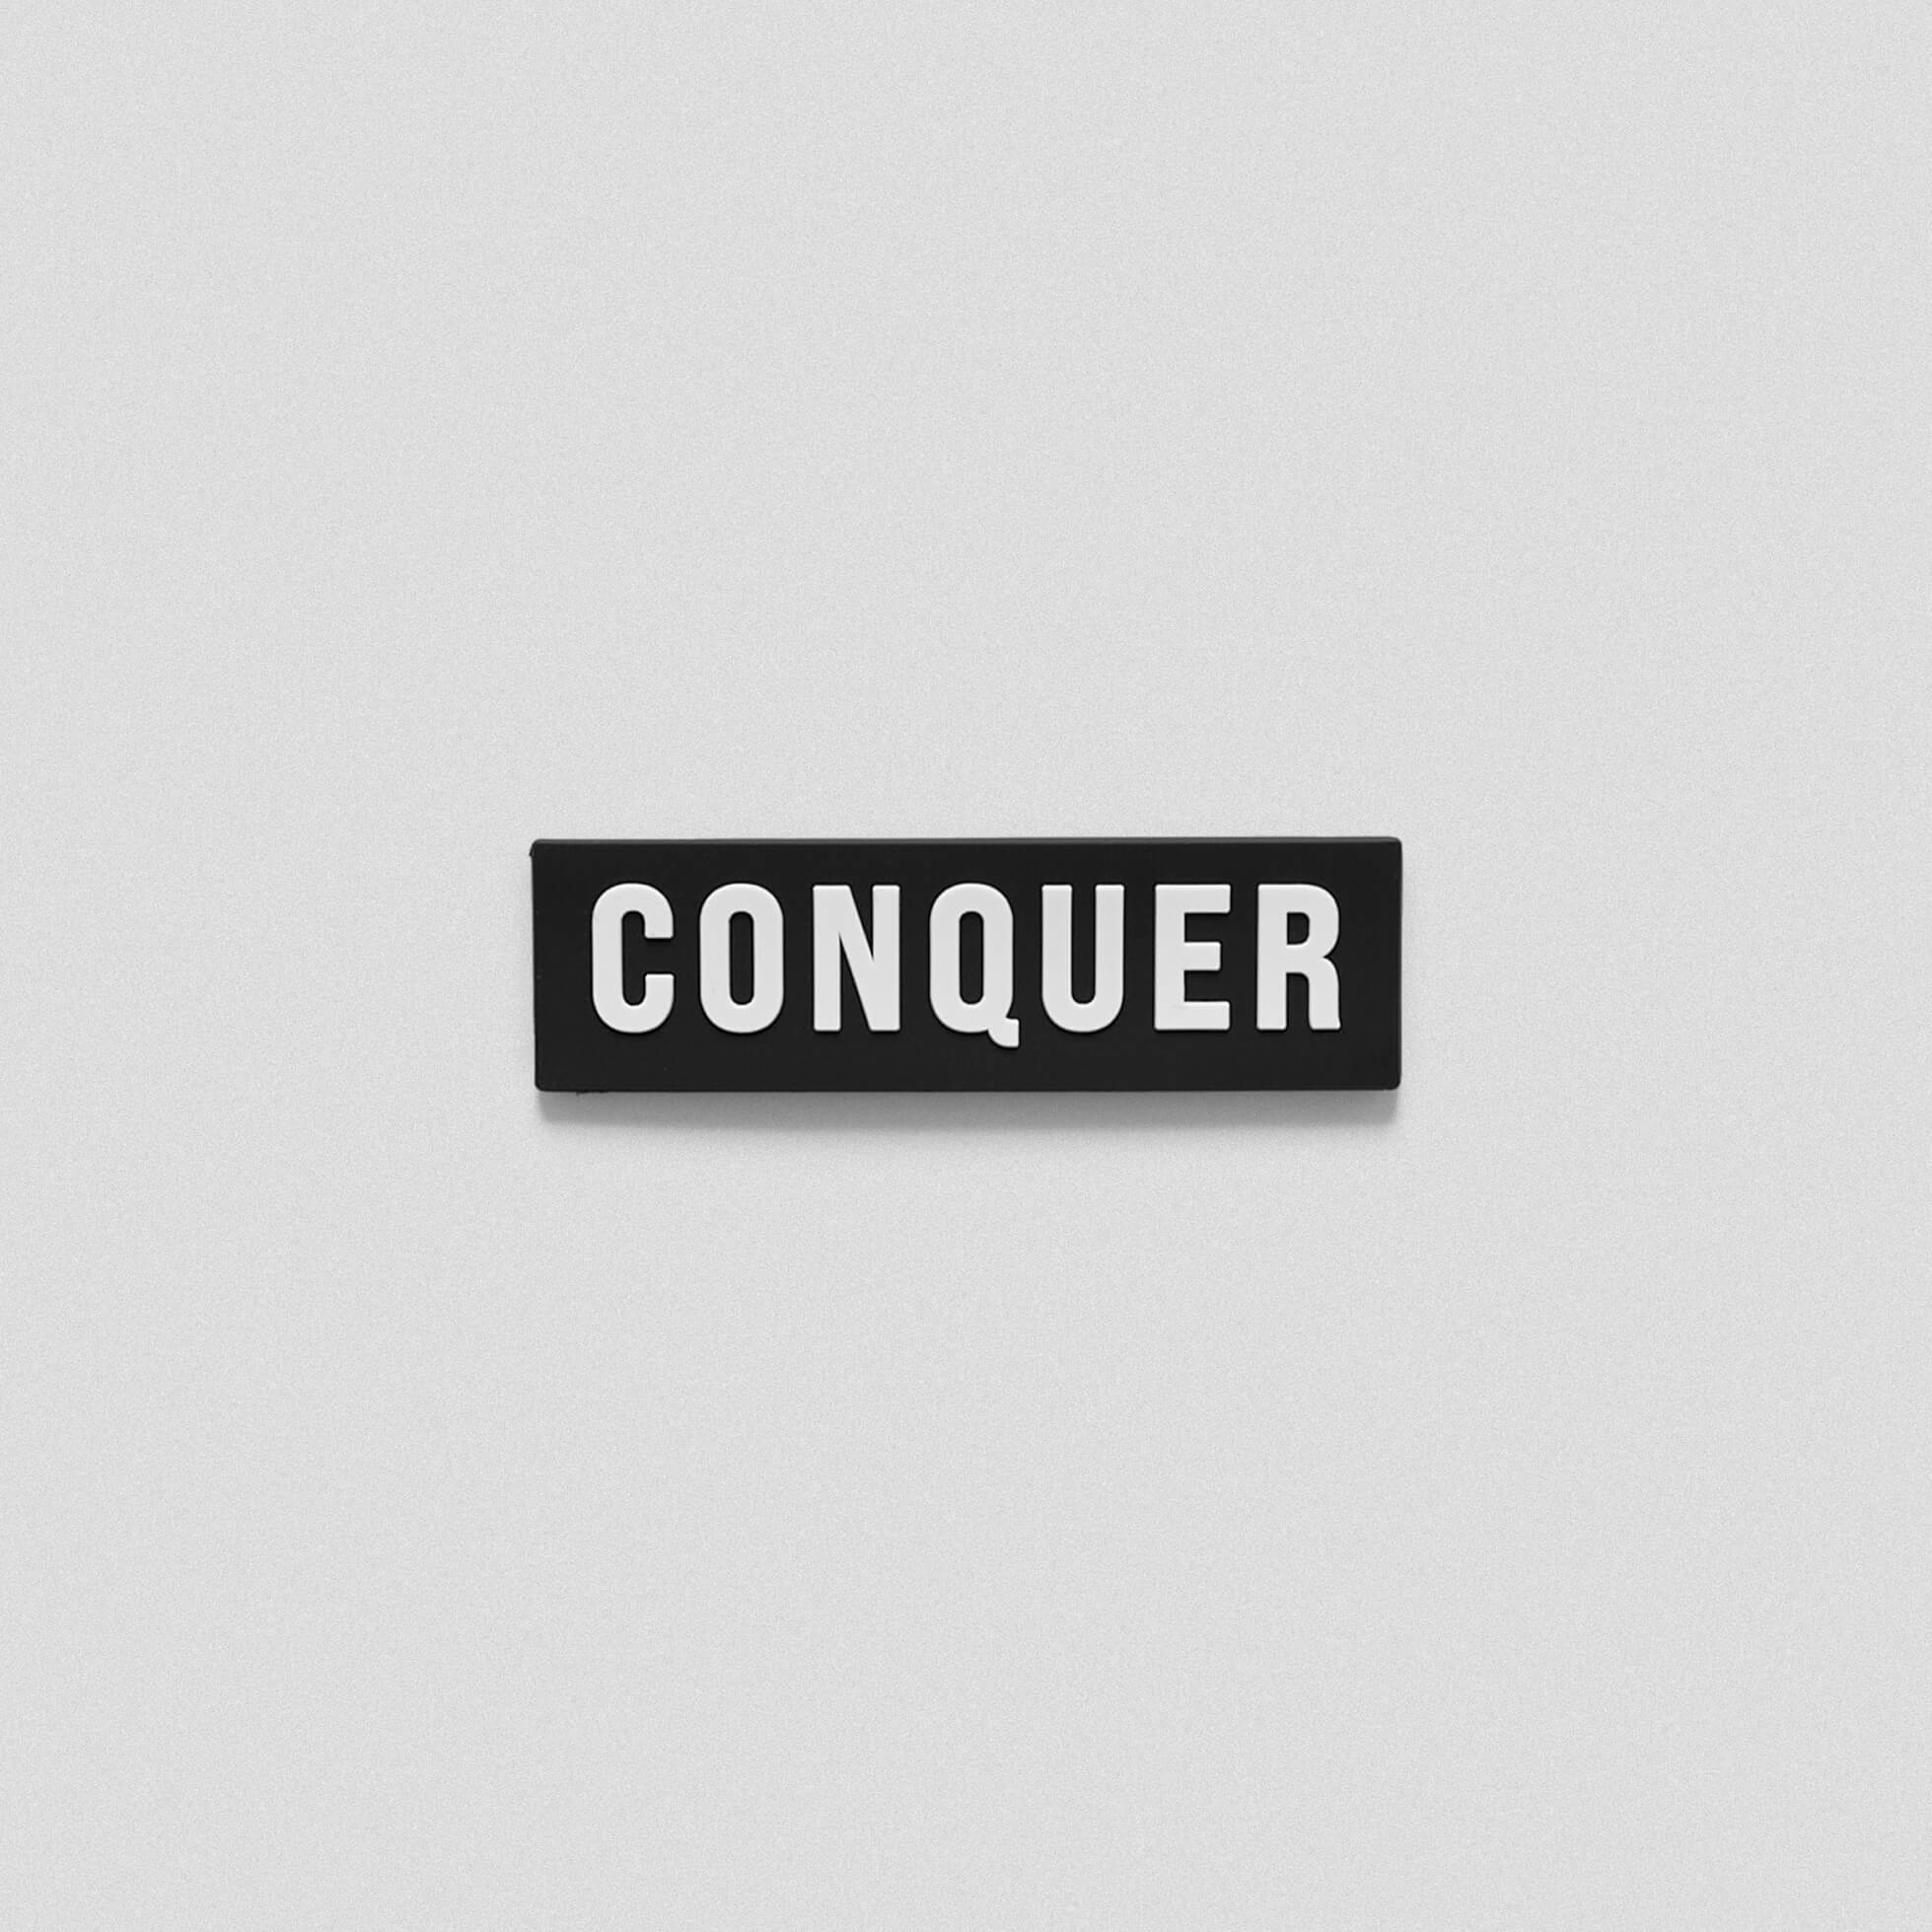 Black white patch that says conquer across.